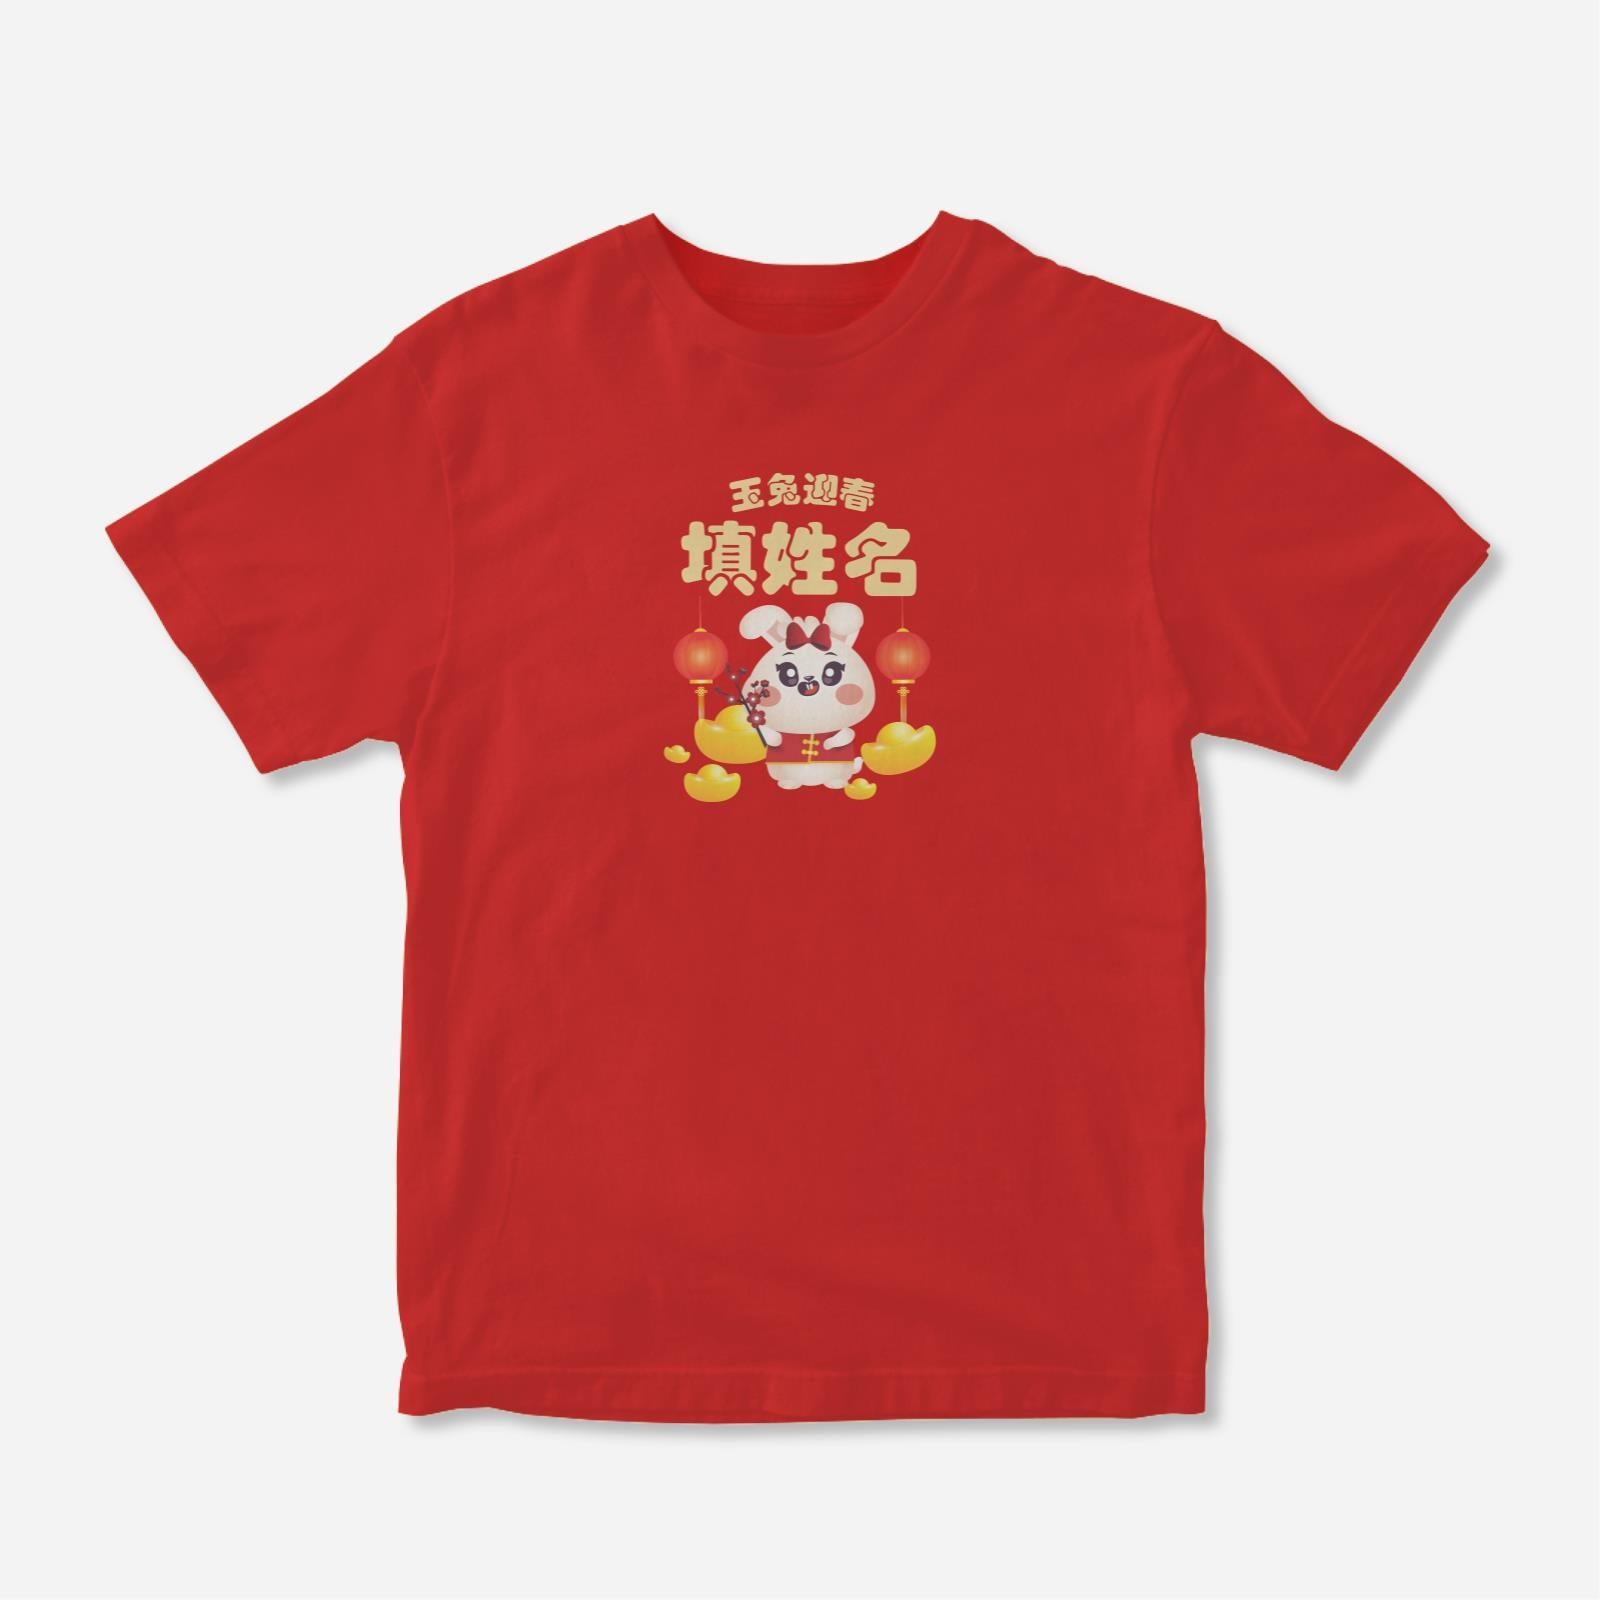 Cny Rabbit Family - Sister Rabbit Kids Tee Shirt with Chinese Personalization